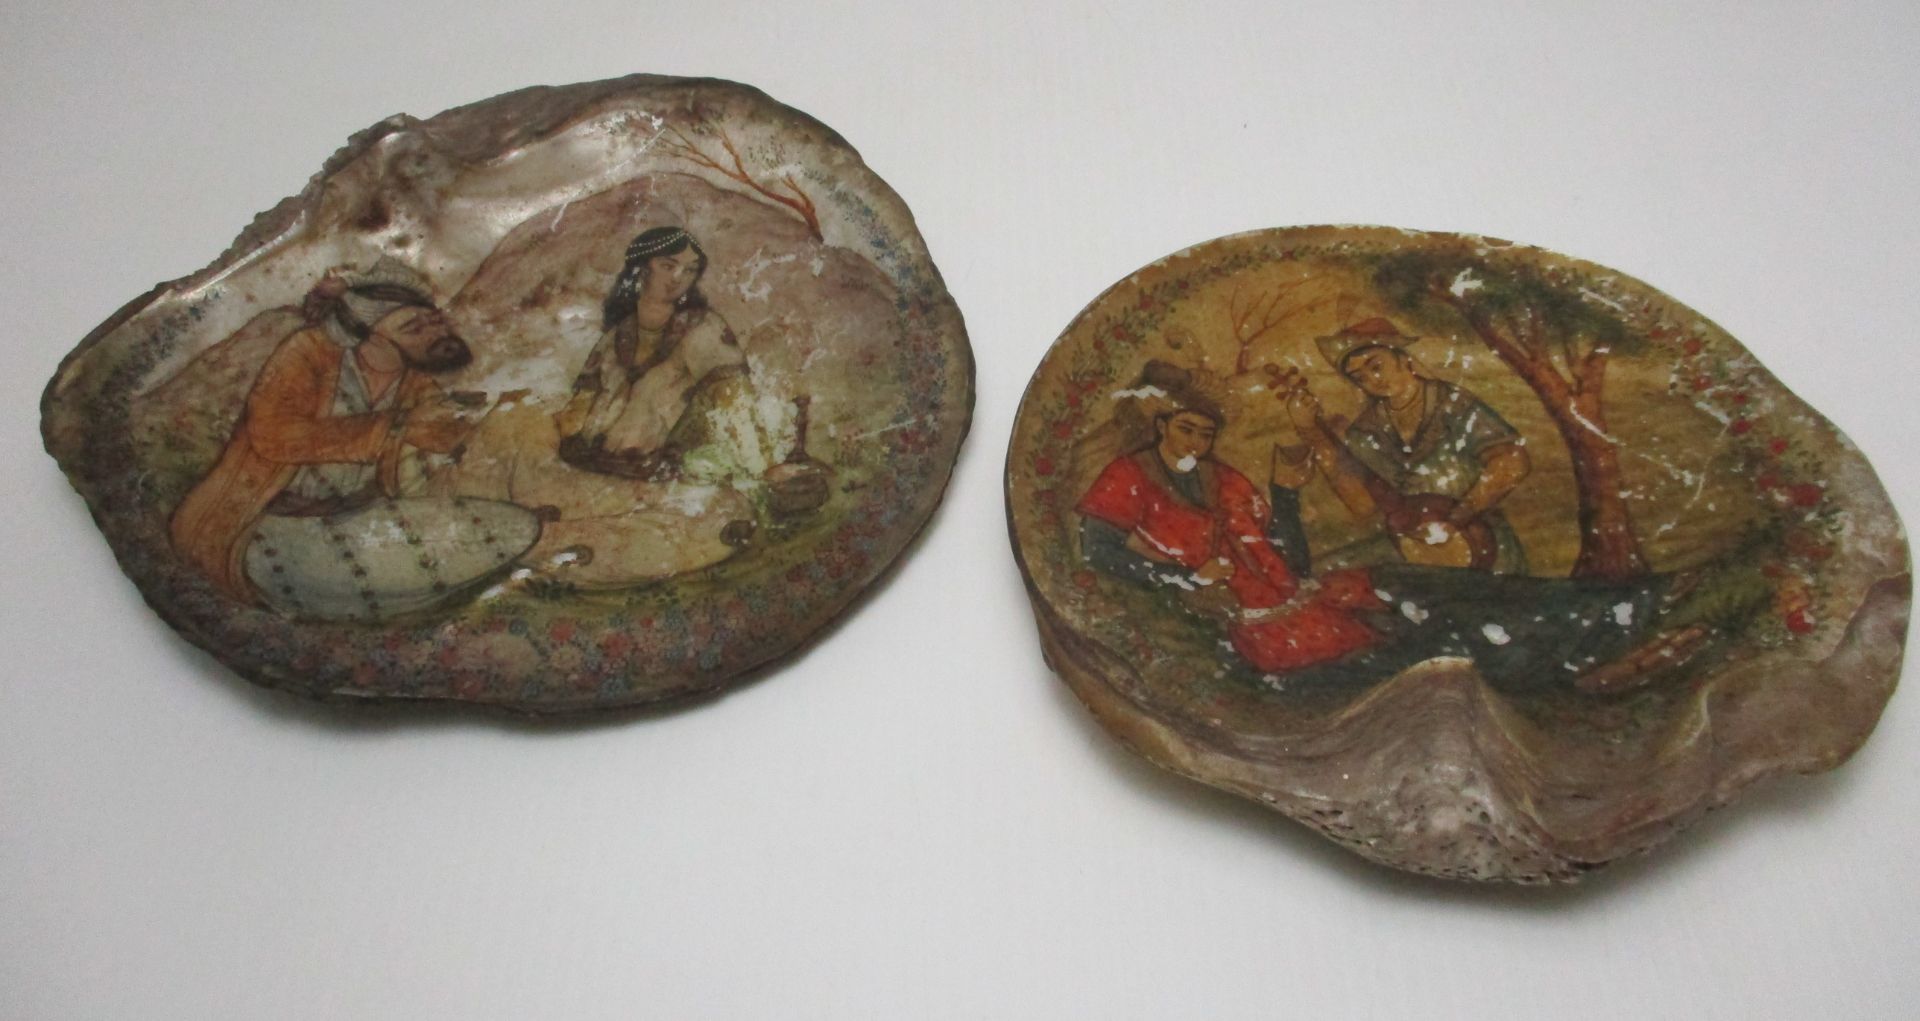 Two sea shells hand painted with Indian figures